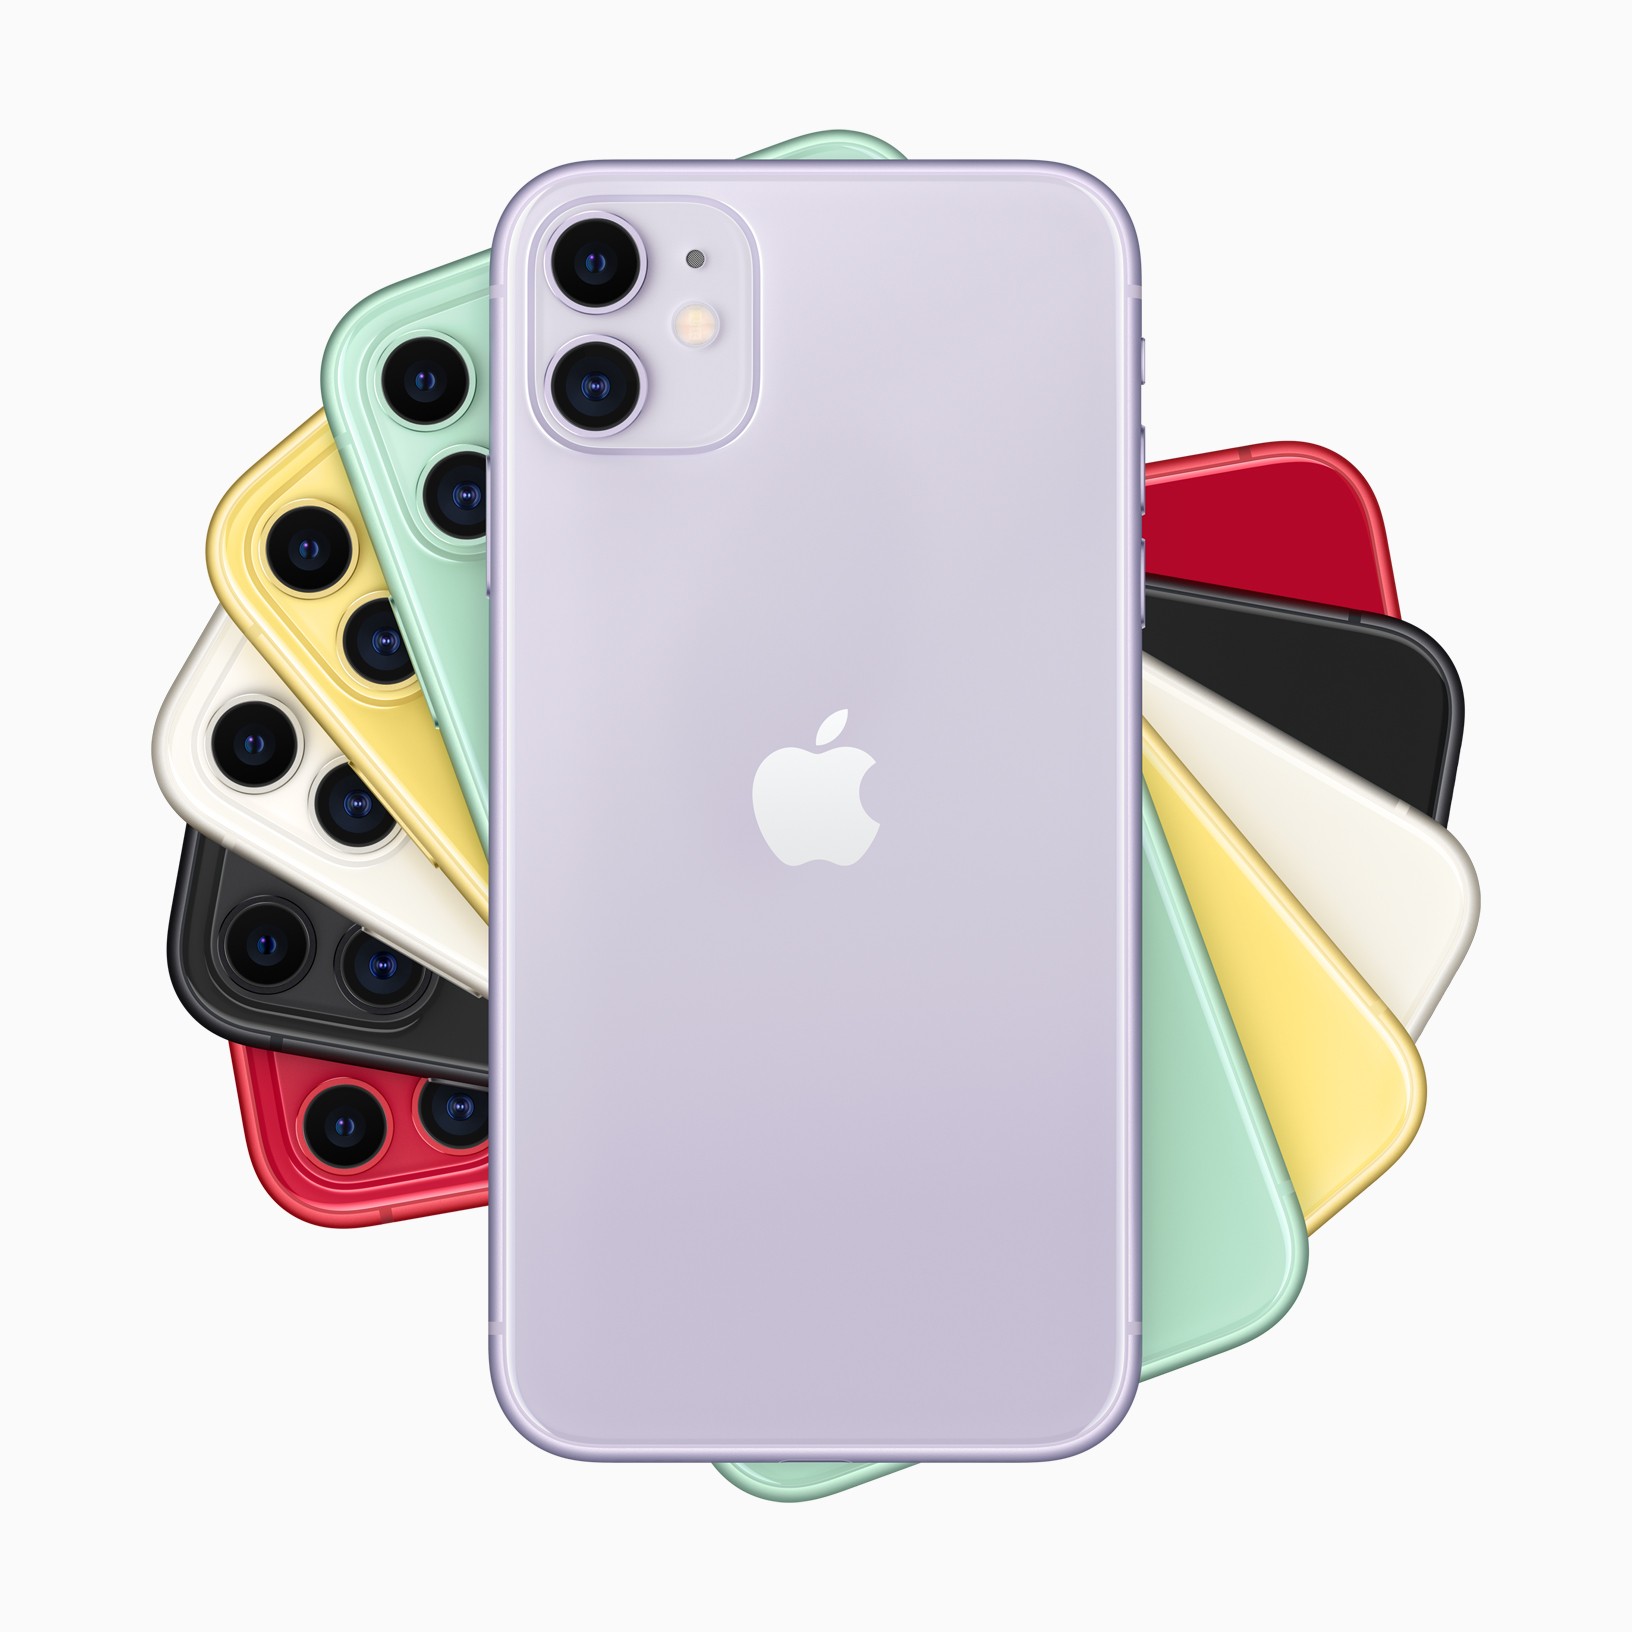 Apple announces the iphone 11 iphone 11 pro and iphone 11 pro max 527342 2